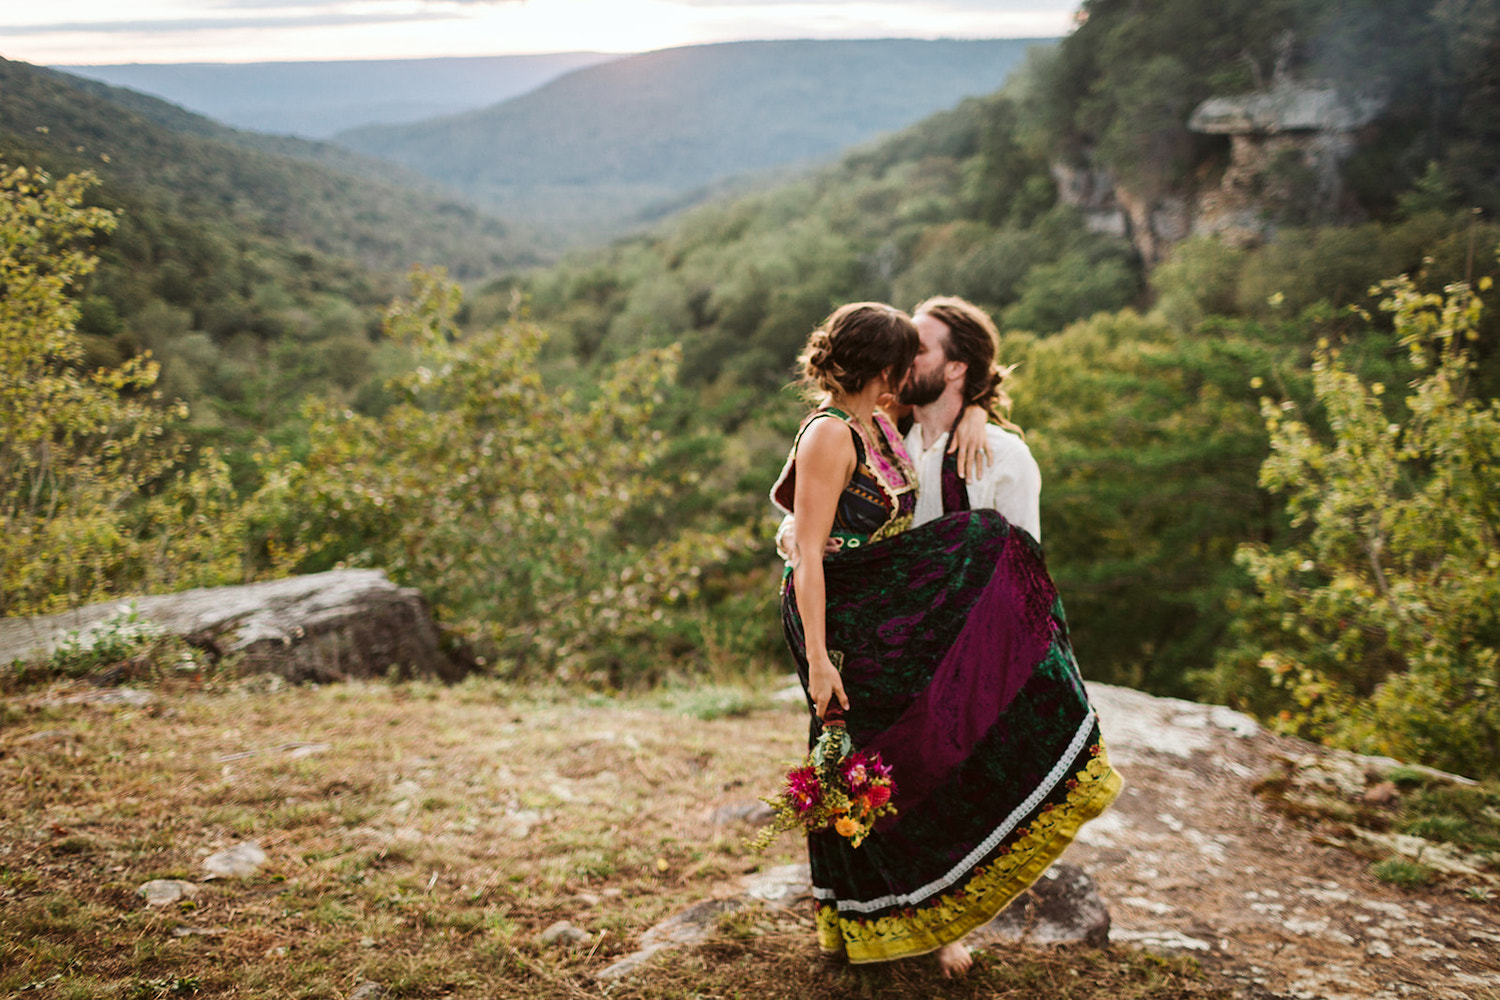 man carries and kisses woman in colorful dress after their Bohemian festival wedding in Chattanooga, Tennessee